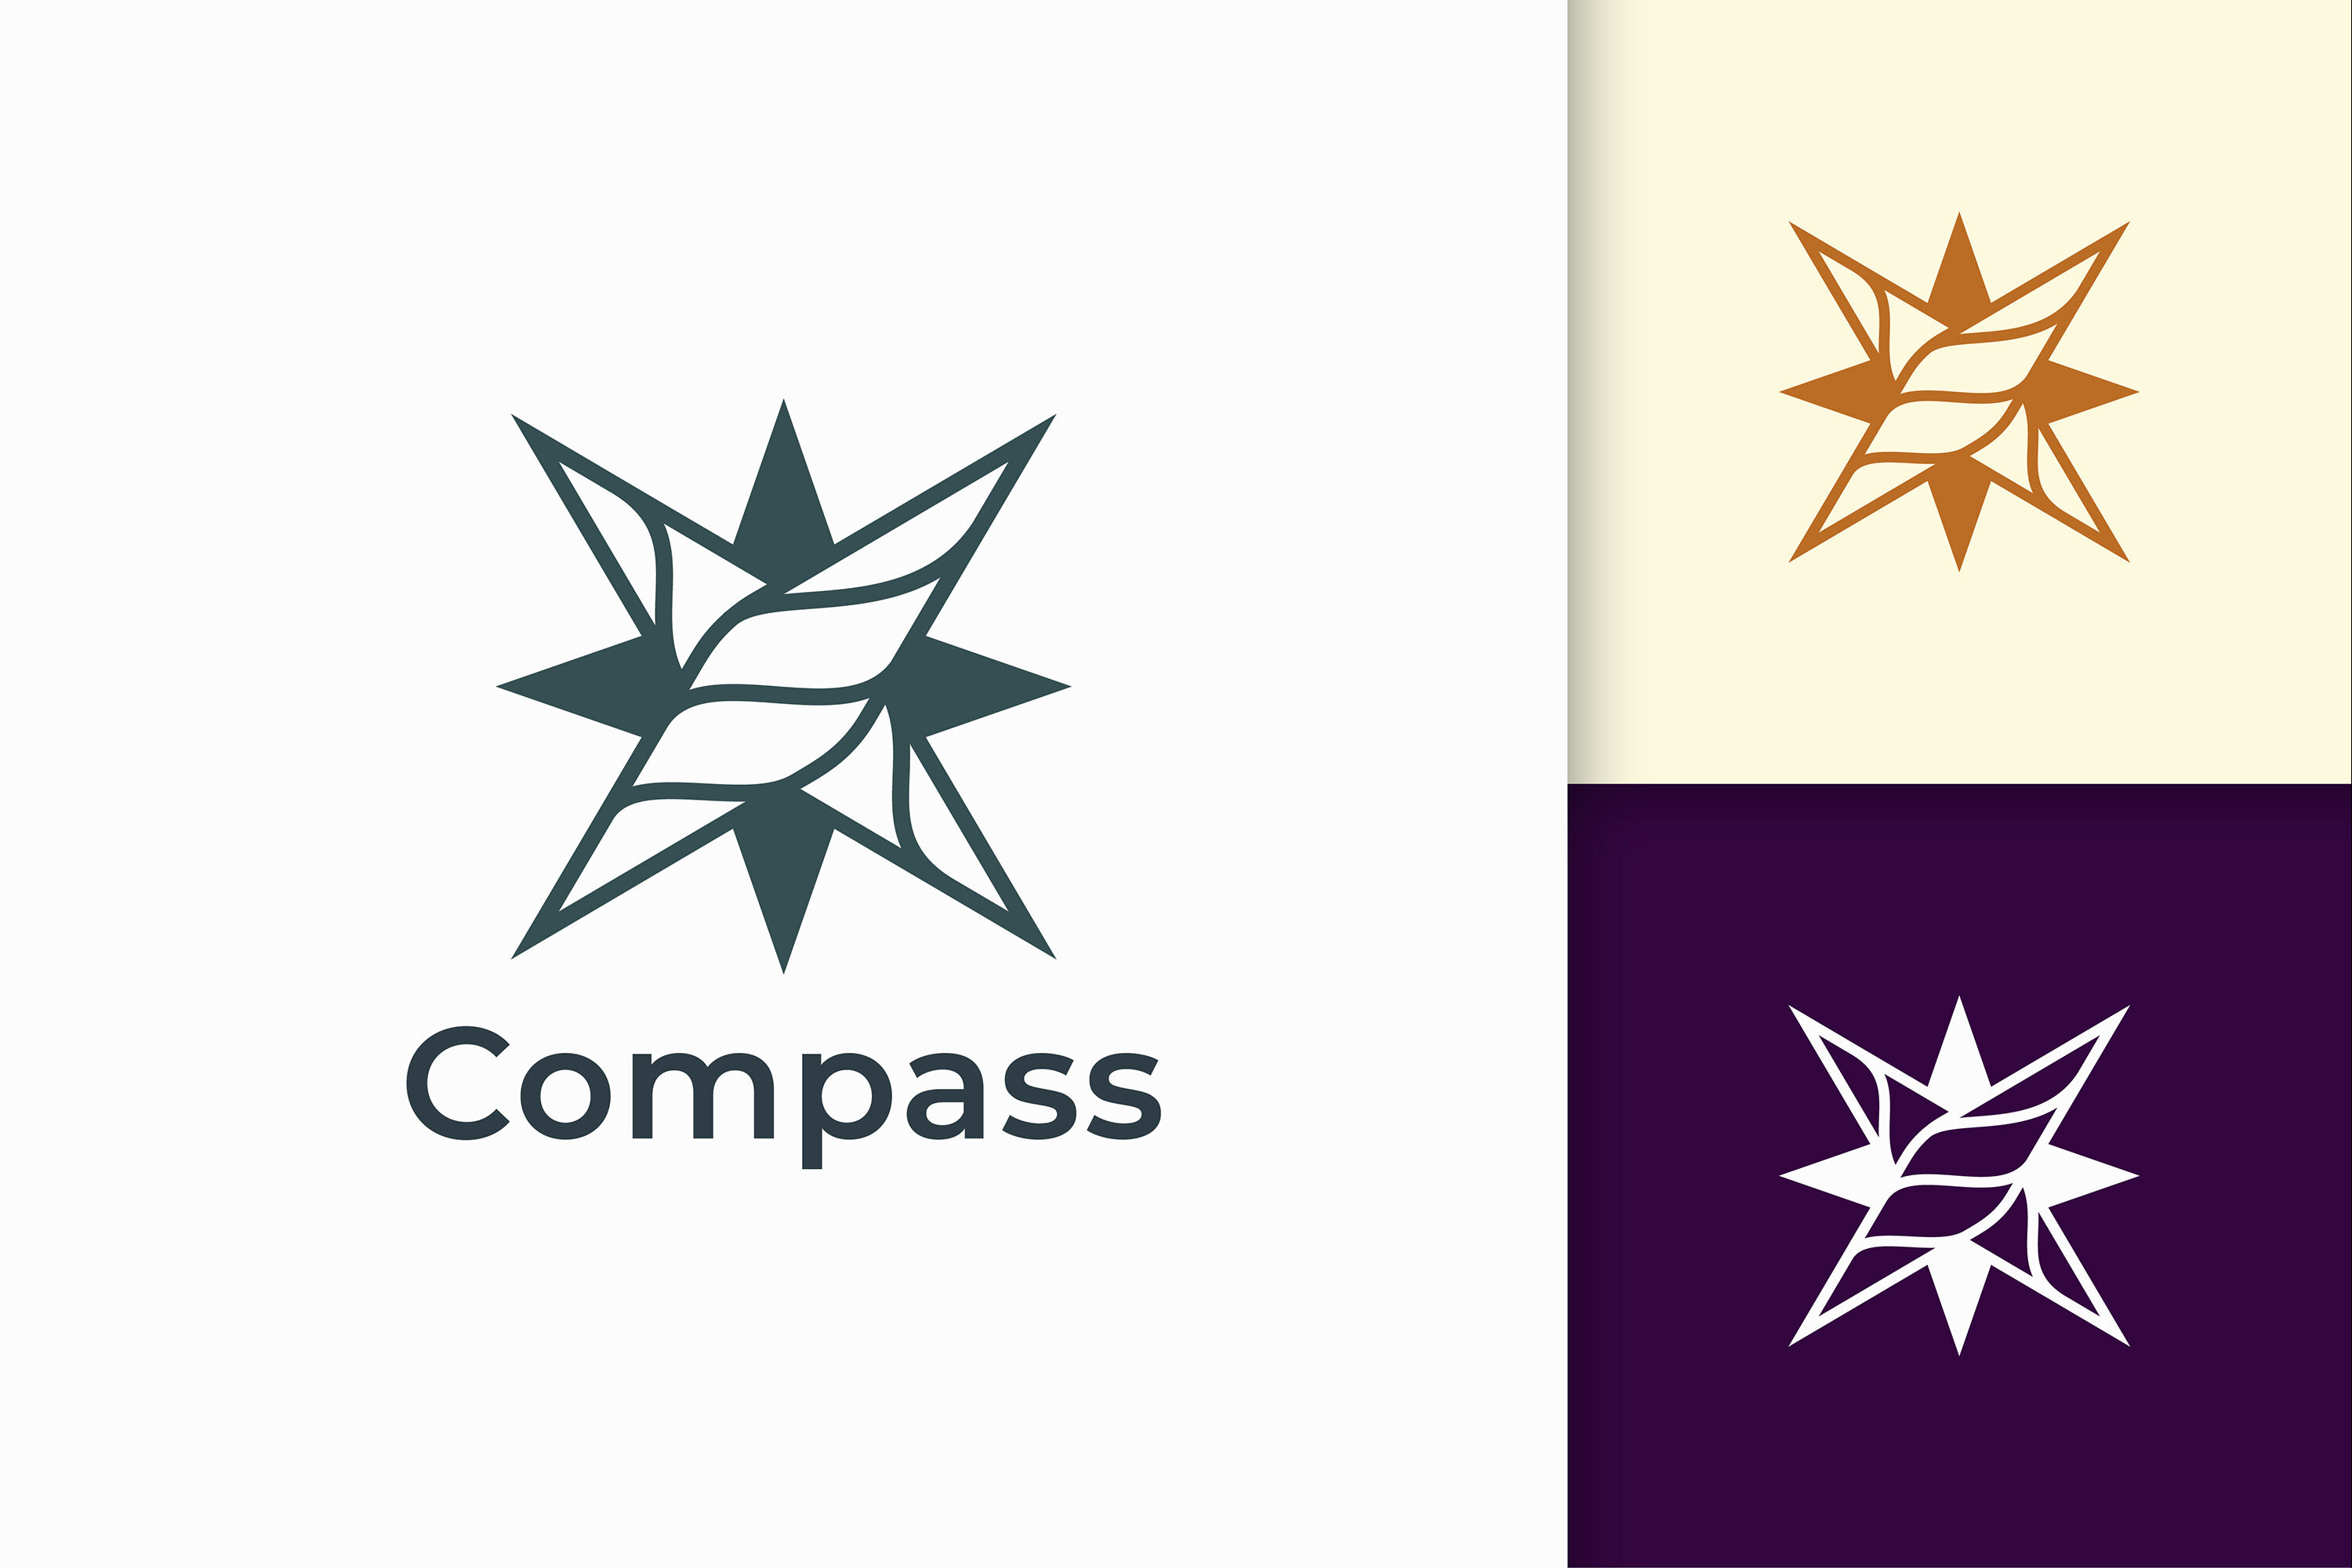 Design Clipart Vector, Stylish Flat Creative Compass Logo Design Concept  Design Vector, Compass, Logo, Vector PNG Image For Free Download